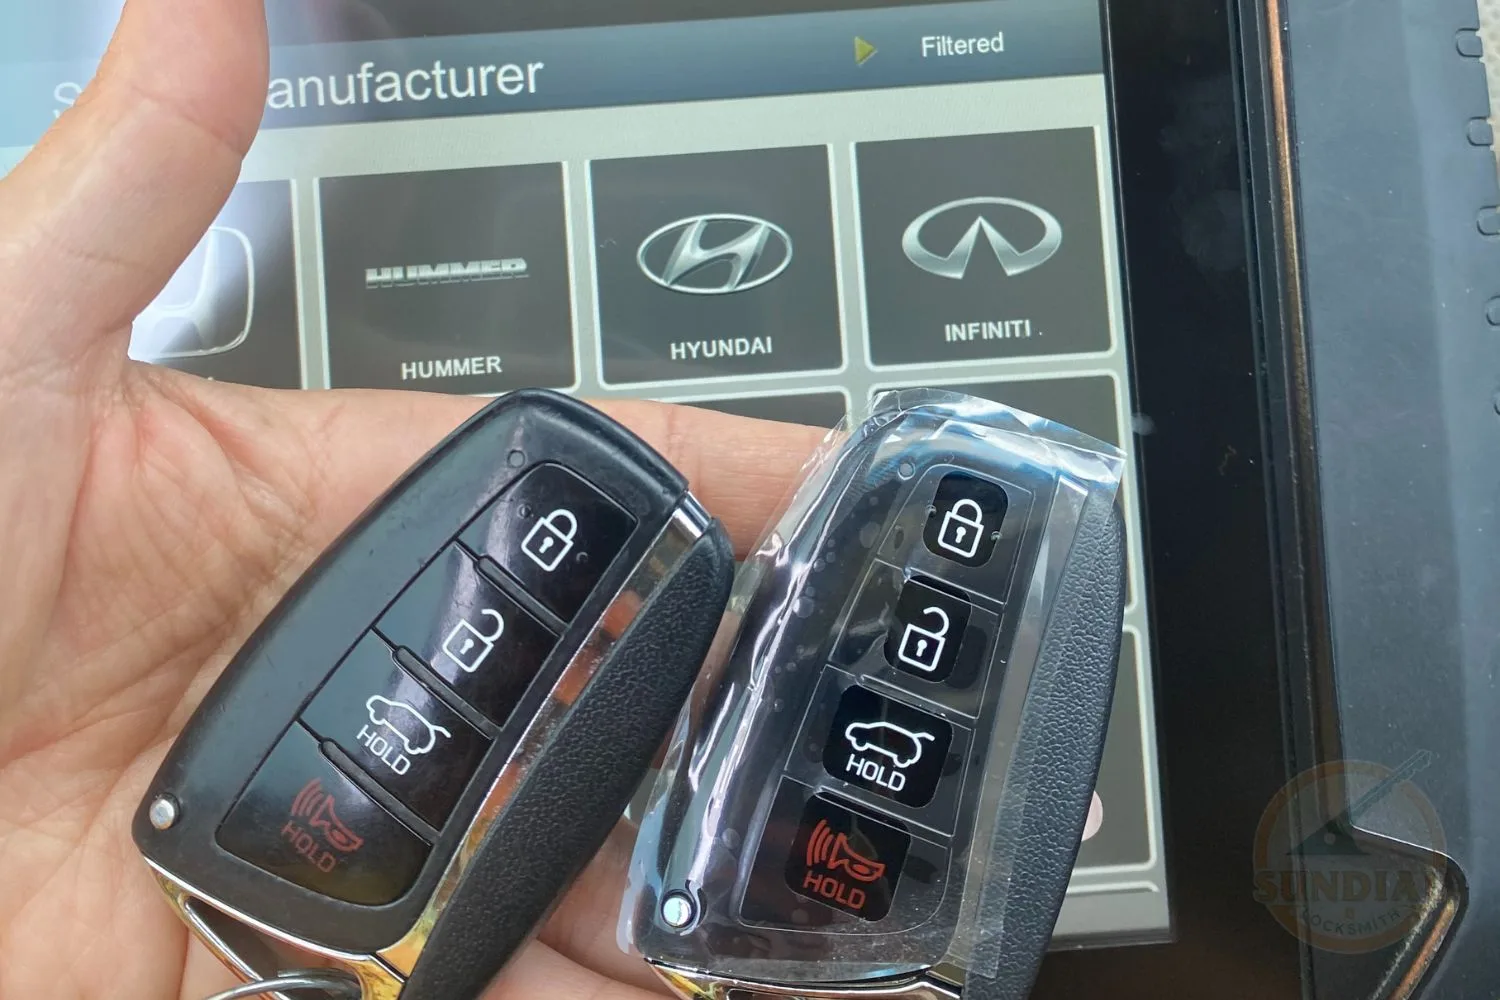 Two car key fobs, one with visible wear and the other with a protective plastic cover, held in front of a car manufacturer selection screen displaying logos for Hummer, Hyundai, and Infiniti.